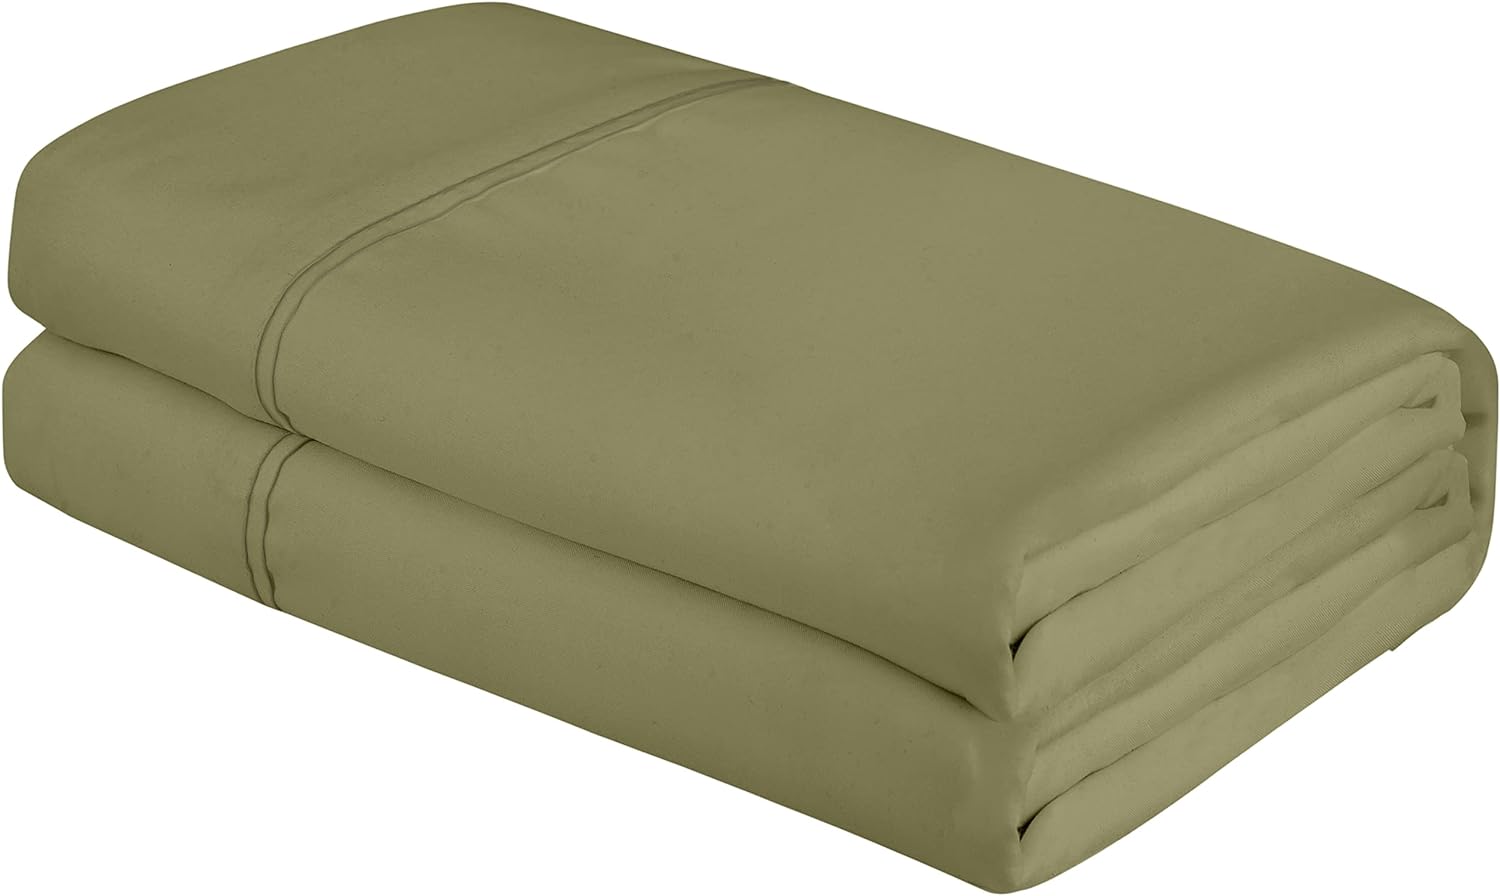 Royale Linens Full Size Flat Sheet Only - Brushed 1800 Microfiber - Ultra Soft & Breathable - Wrinkle & Stain Resistant - Hotel Quality Flat Sheet Sold Separately - Top Sheet for Bed (Full SageGreen)